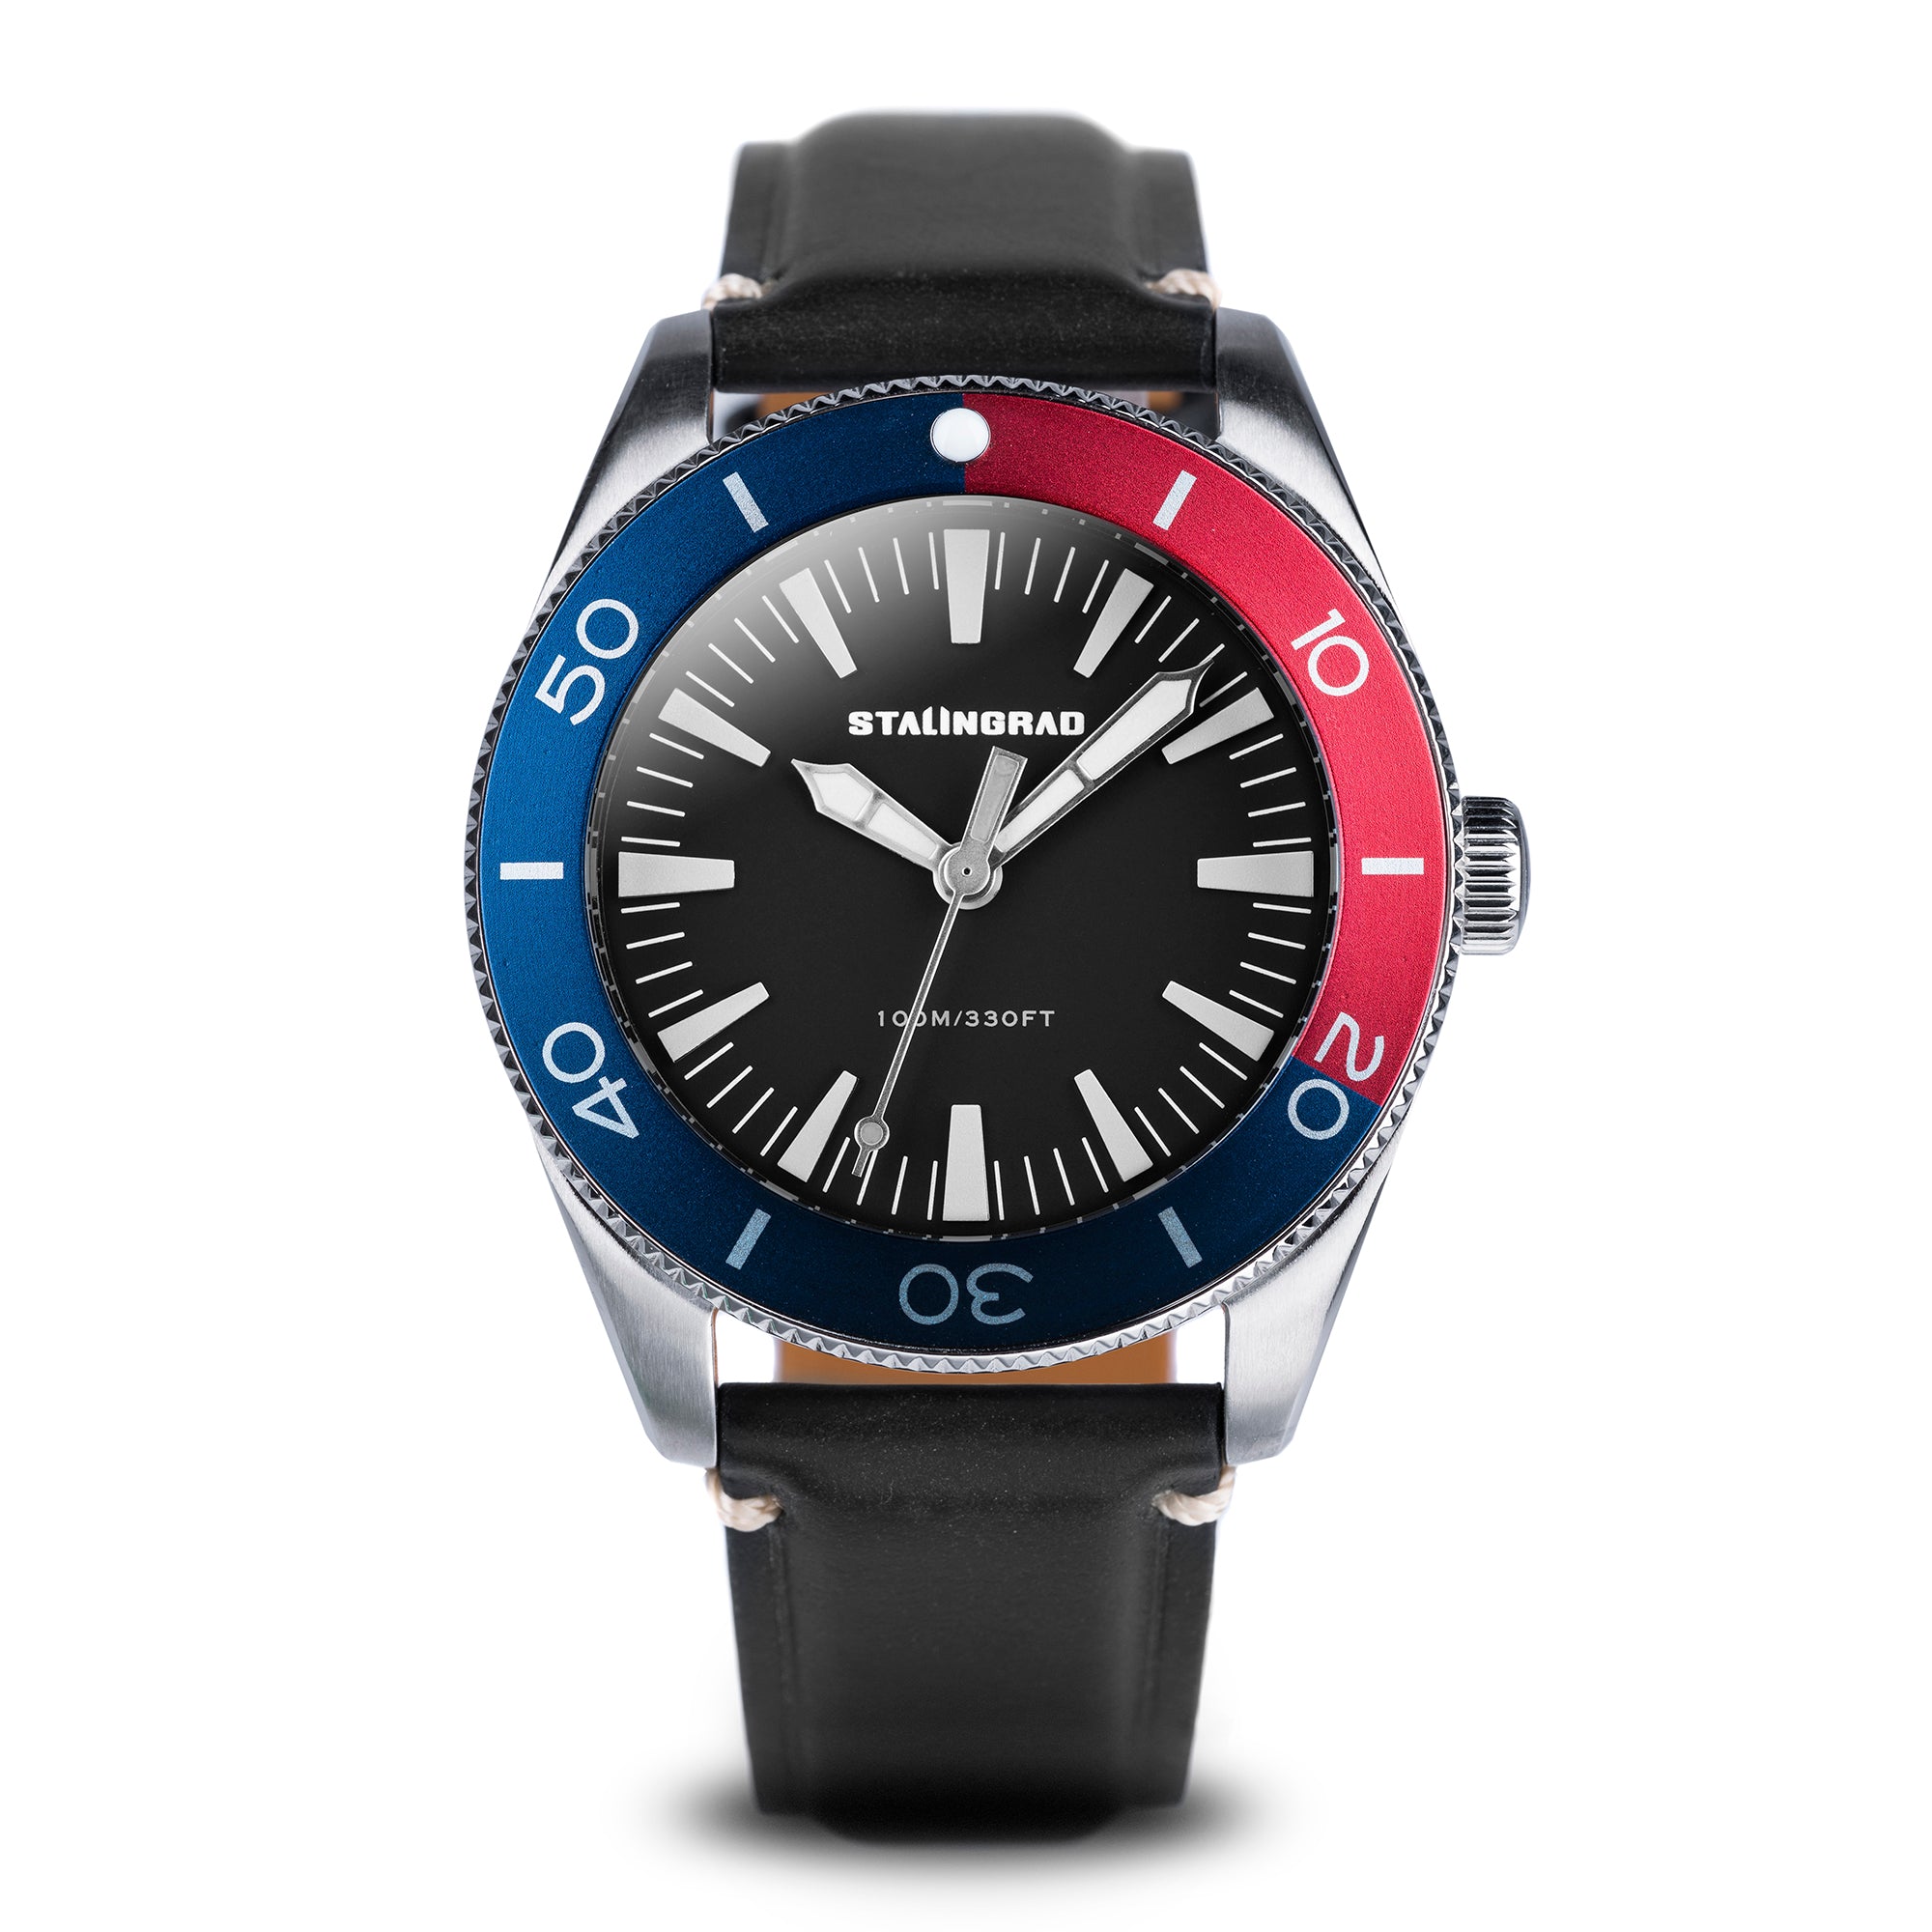 Stalingrad Iron Will Watch Black Dial, with Blue and Red 2 tone Bezel and a black  leather strap on a white background, front view